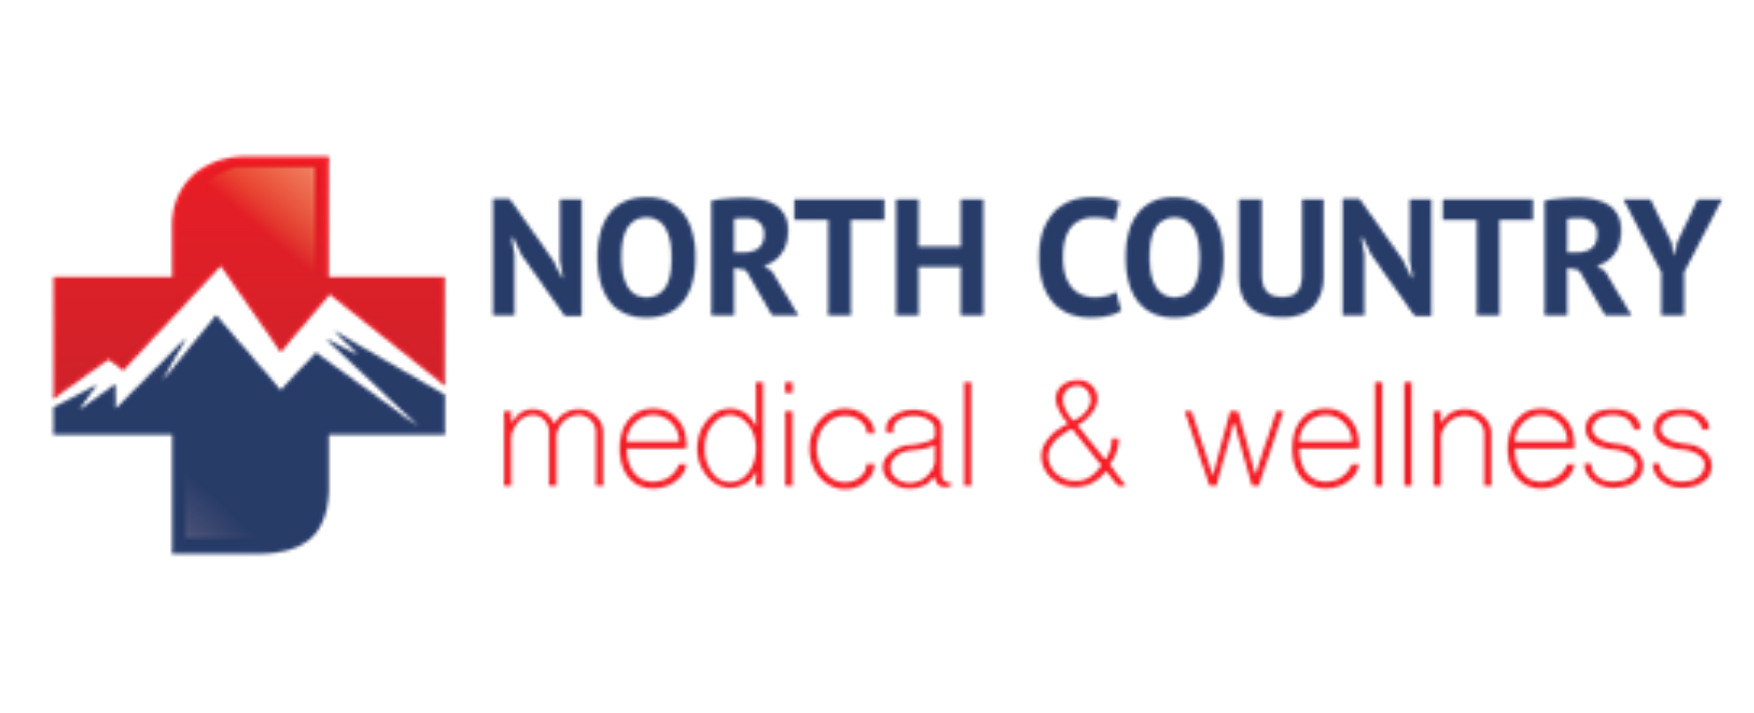 North Country Medical